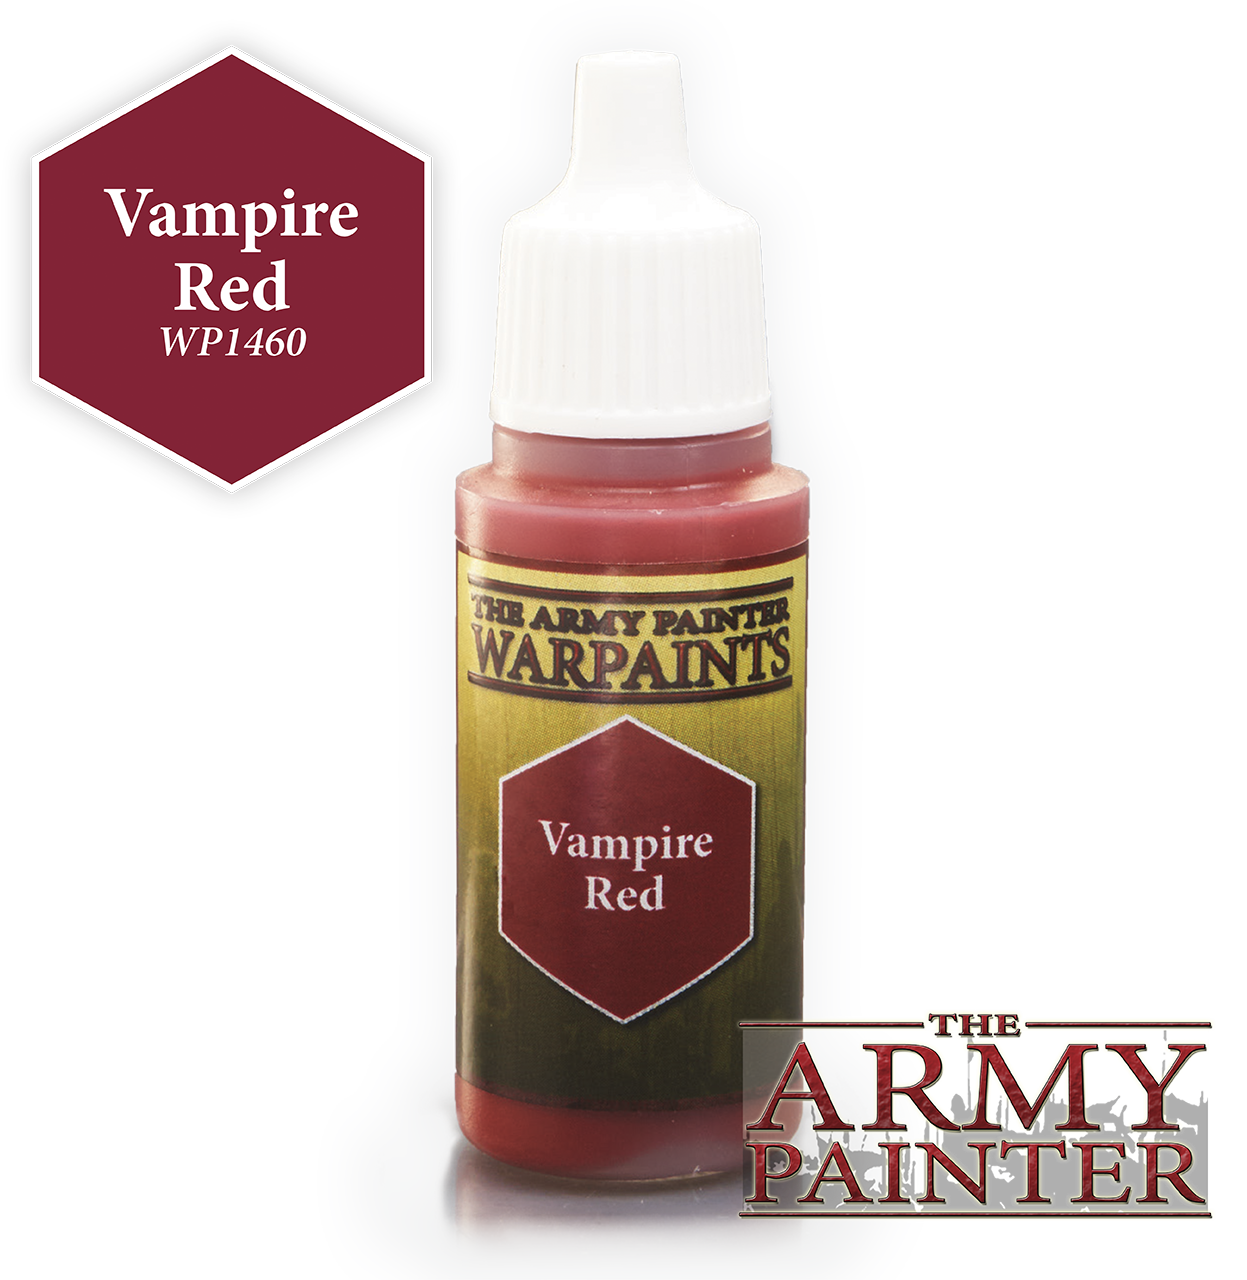 The ARMY PAINTER: Acrylics Warpaint - Vampire Red | Tacoma Games